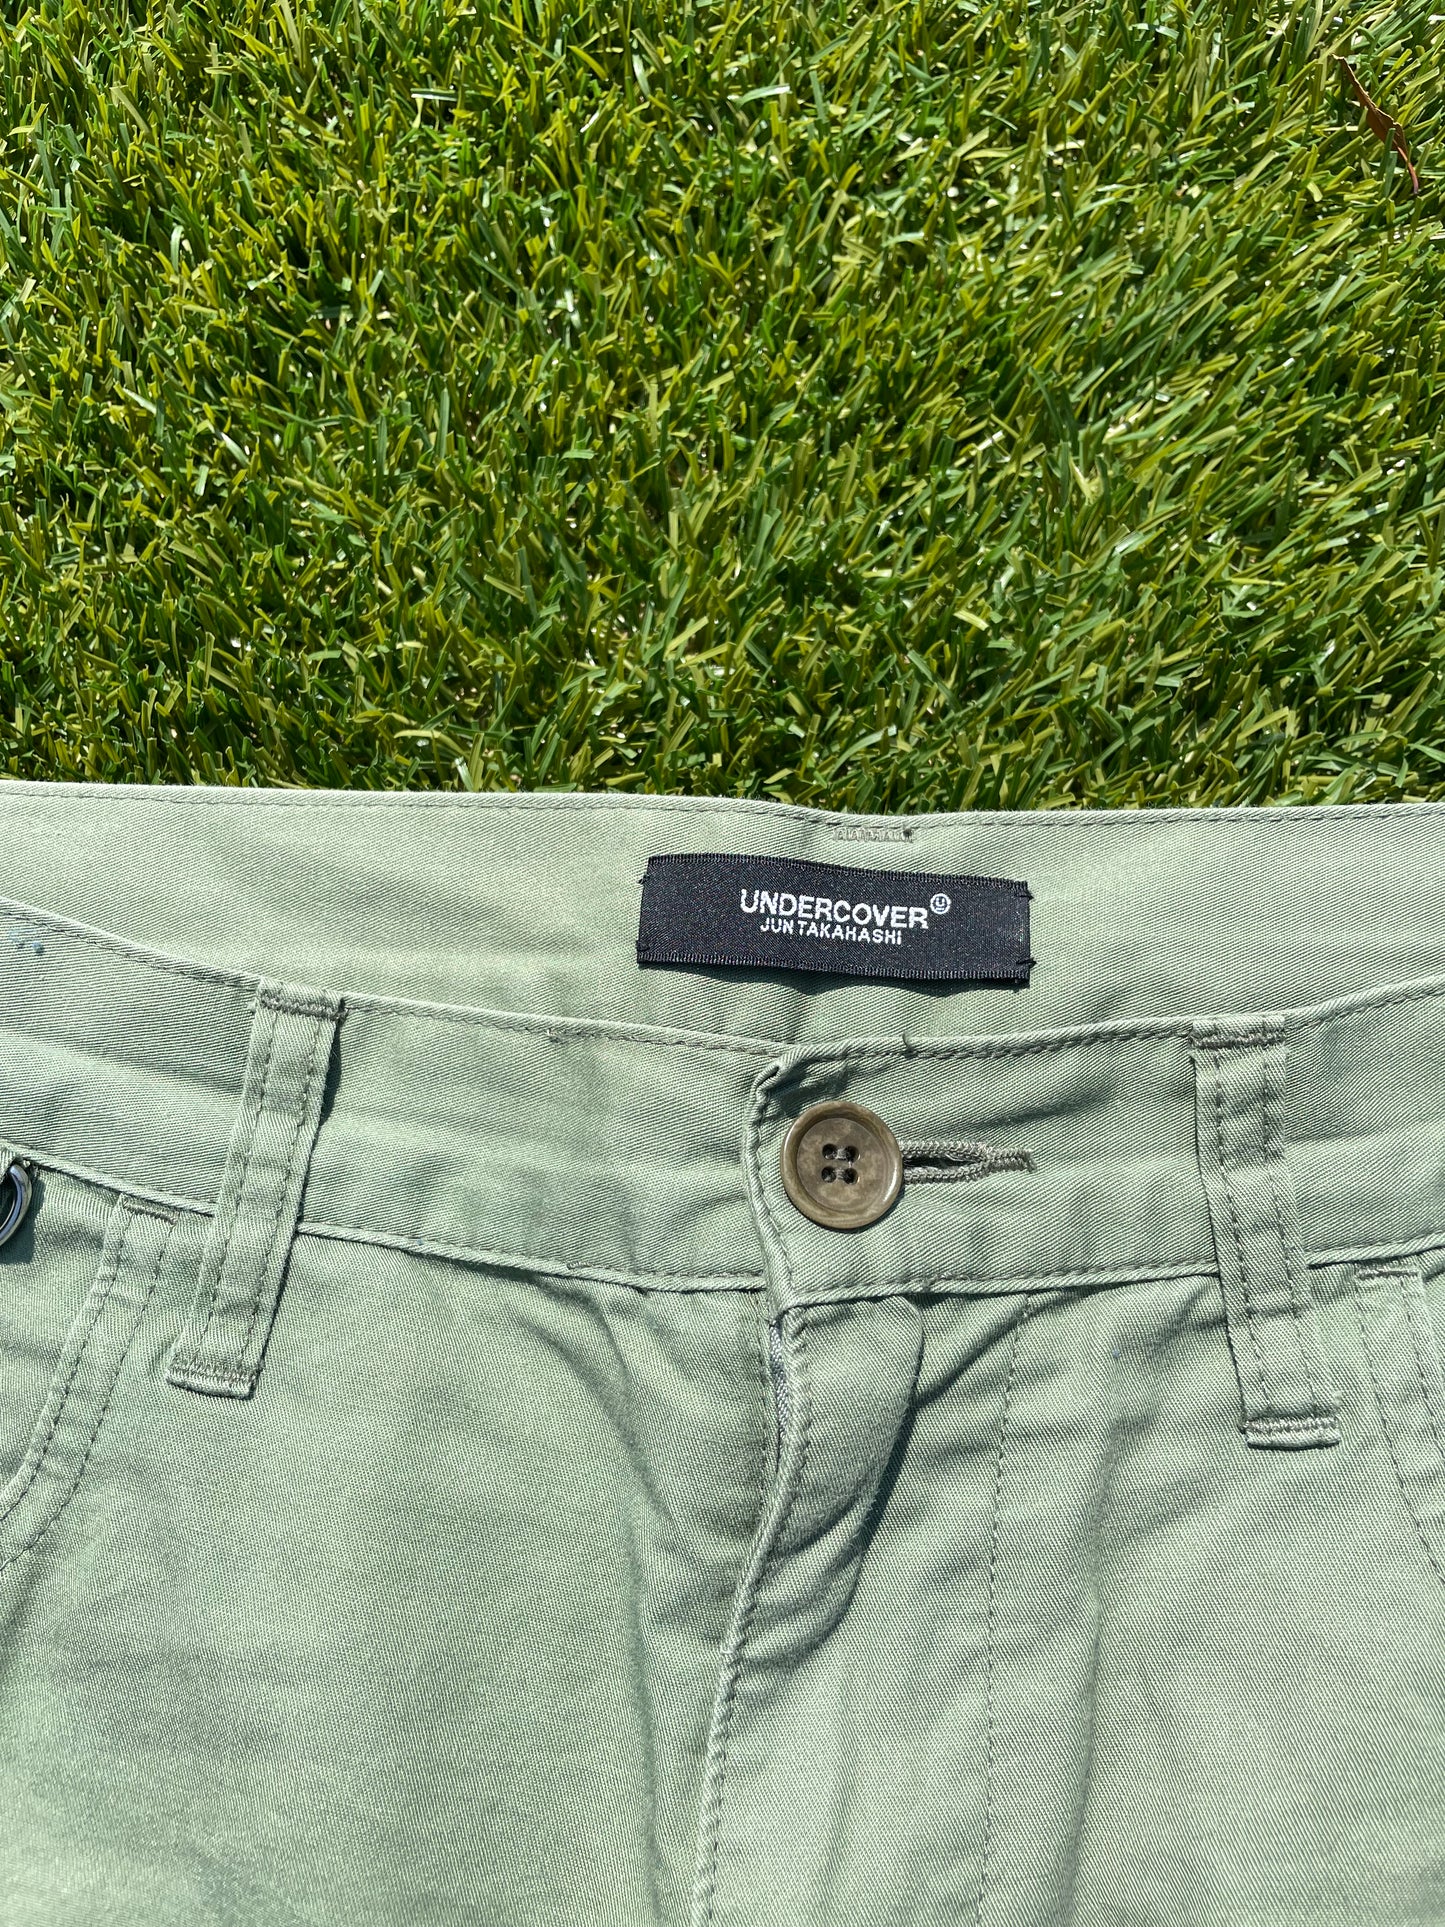 SS19 Undercover Cargo Pockets Olive Shorts